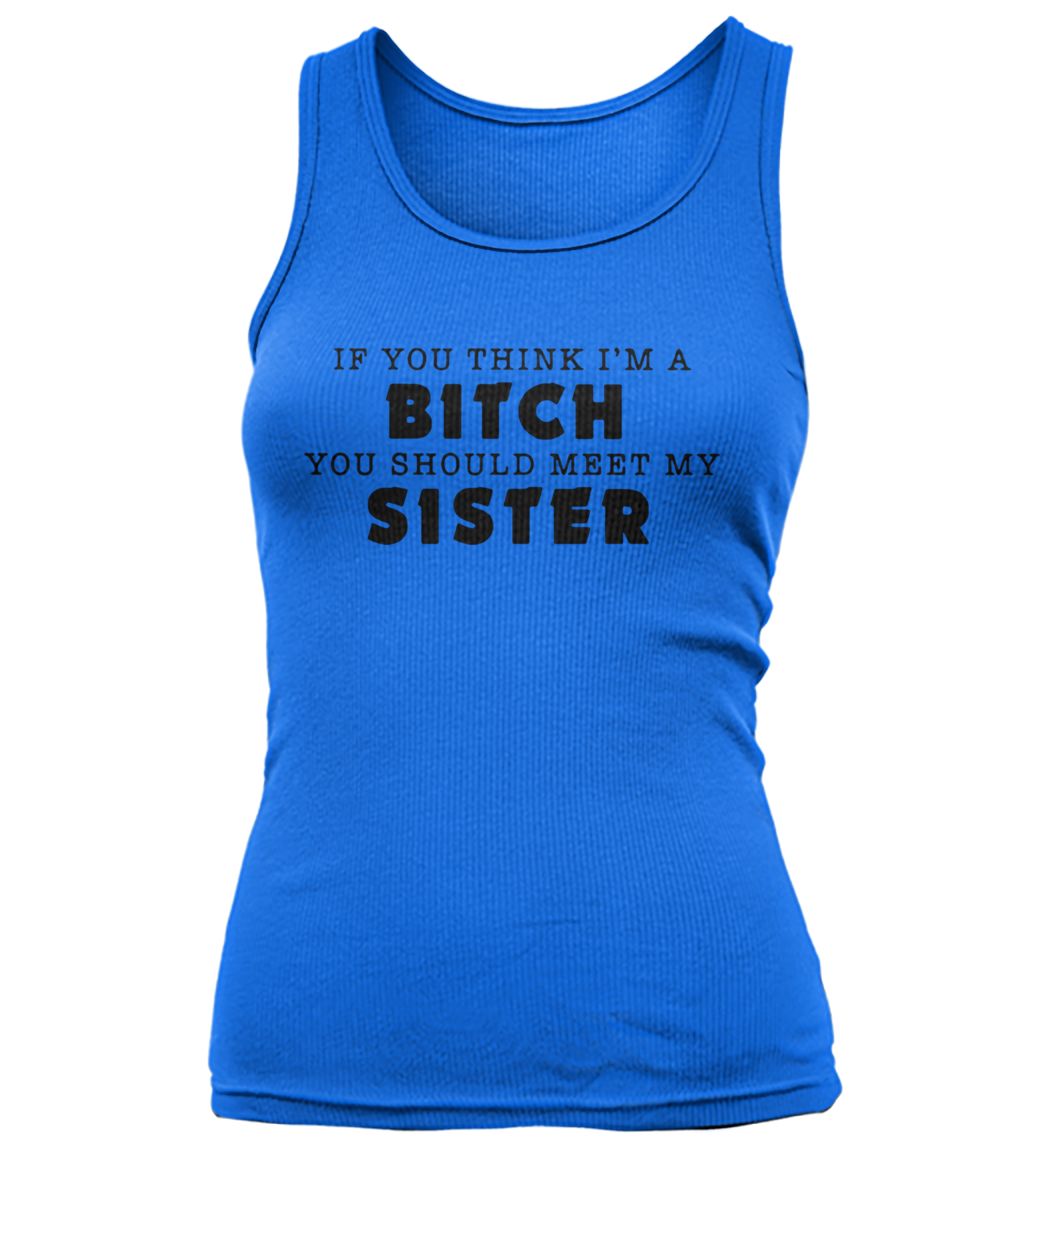 If you think I'm a bitch you should meet my sister women's tank top